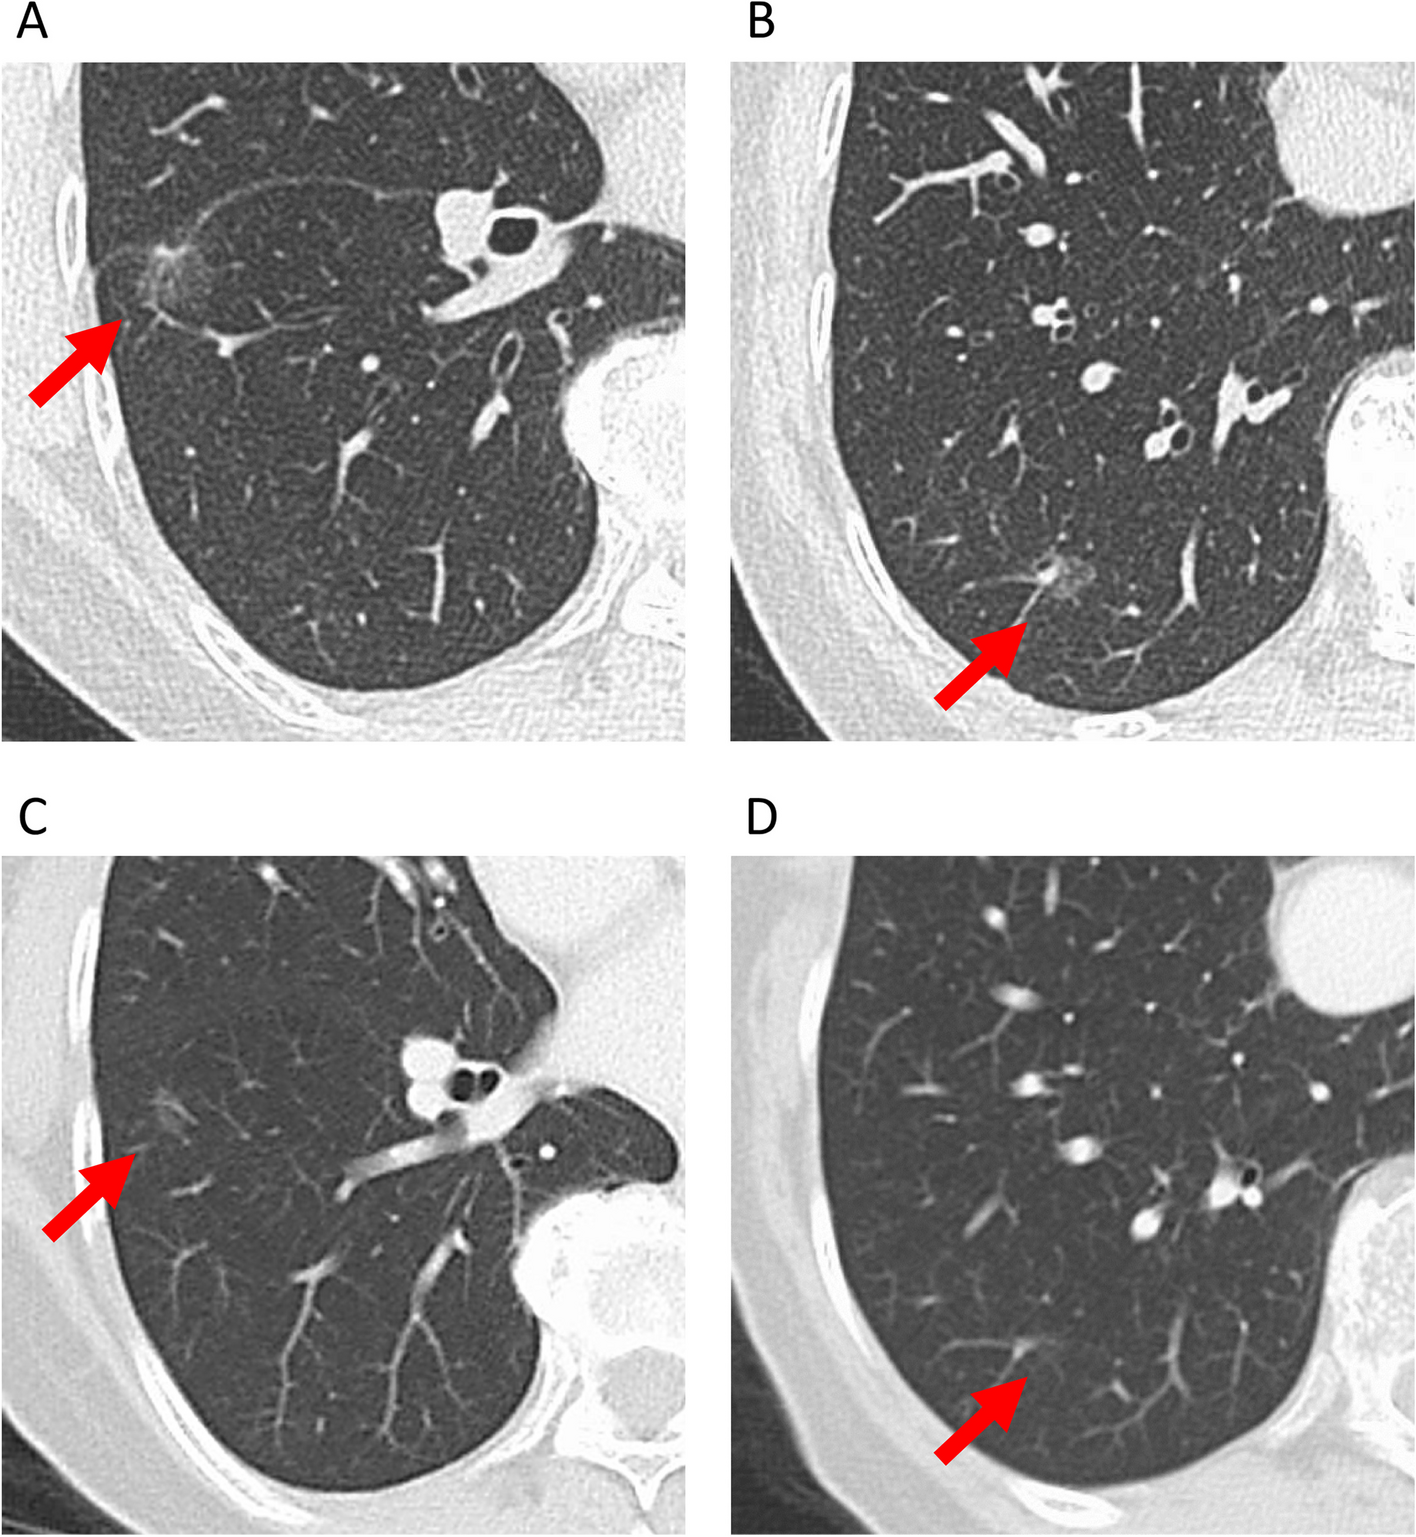 A case of lung metastasis from gastric cancer presenting as ground-glass opacity dominant nodules